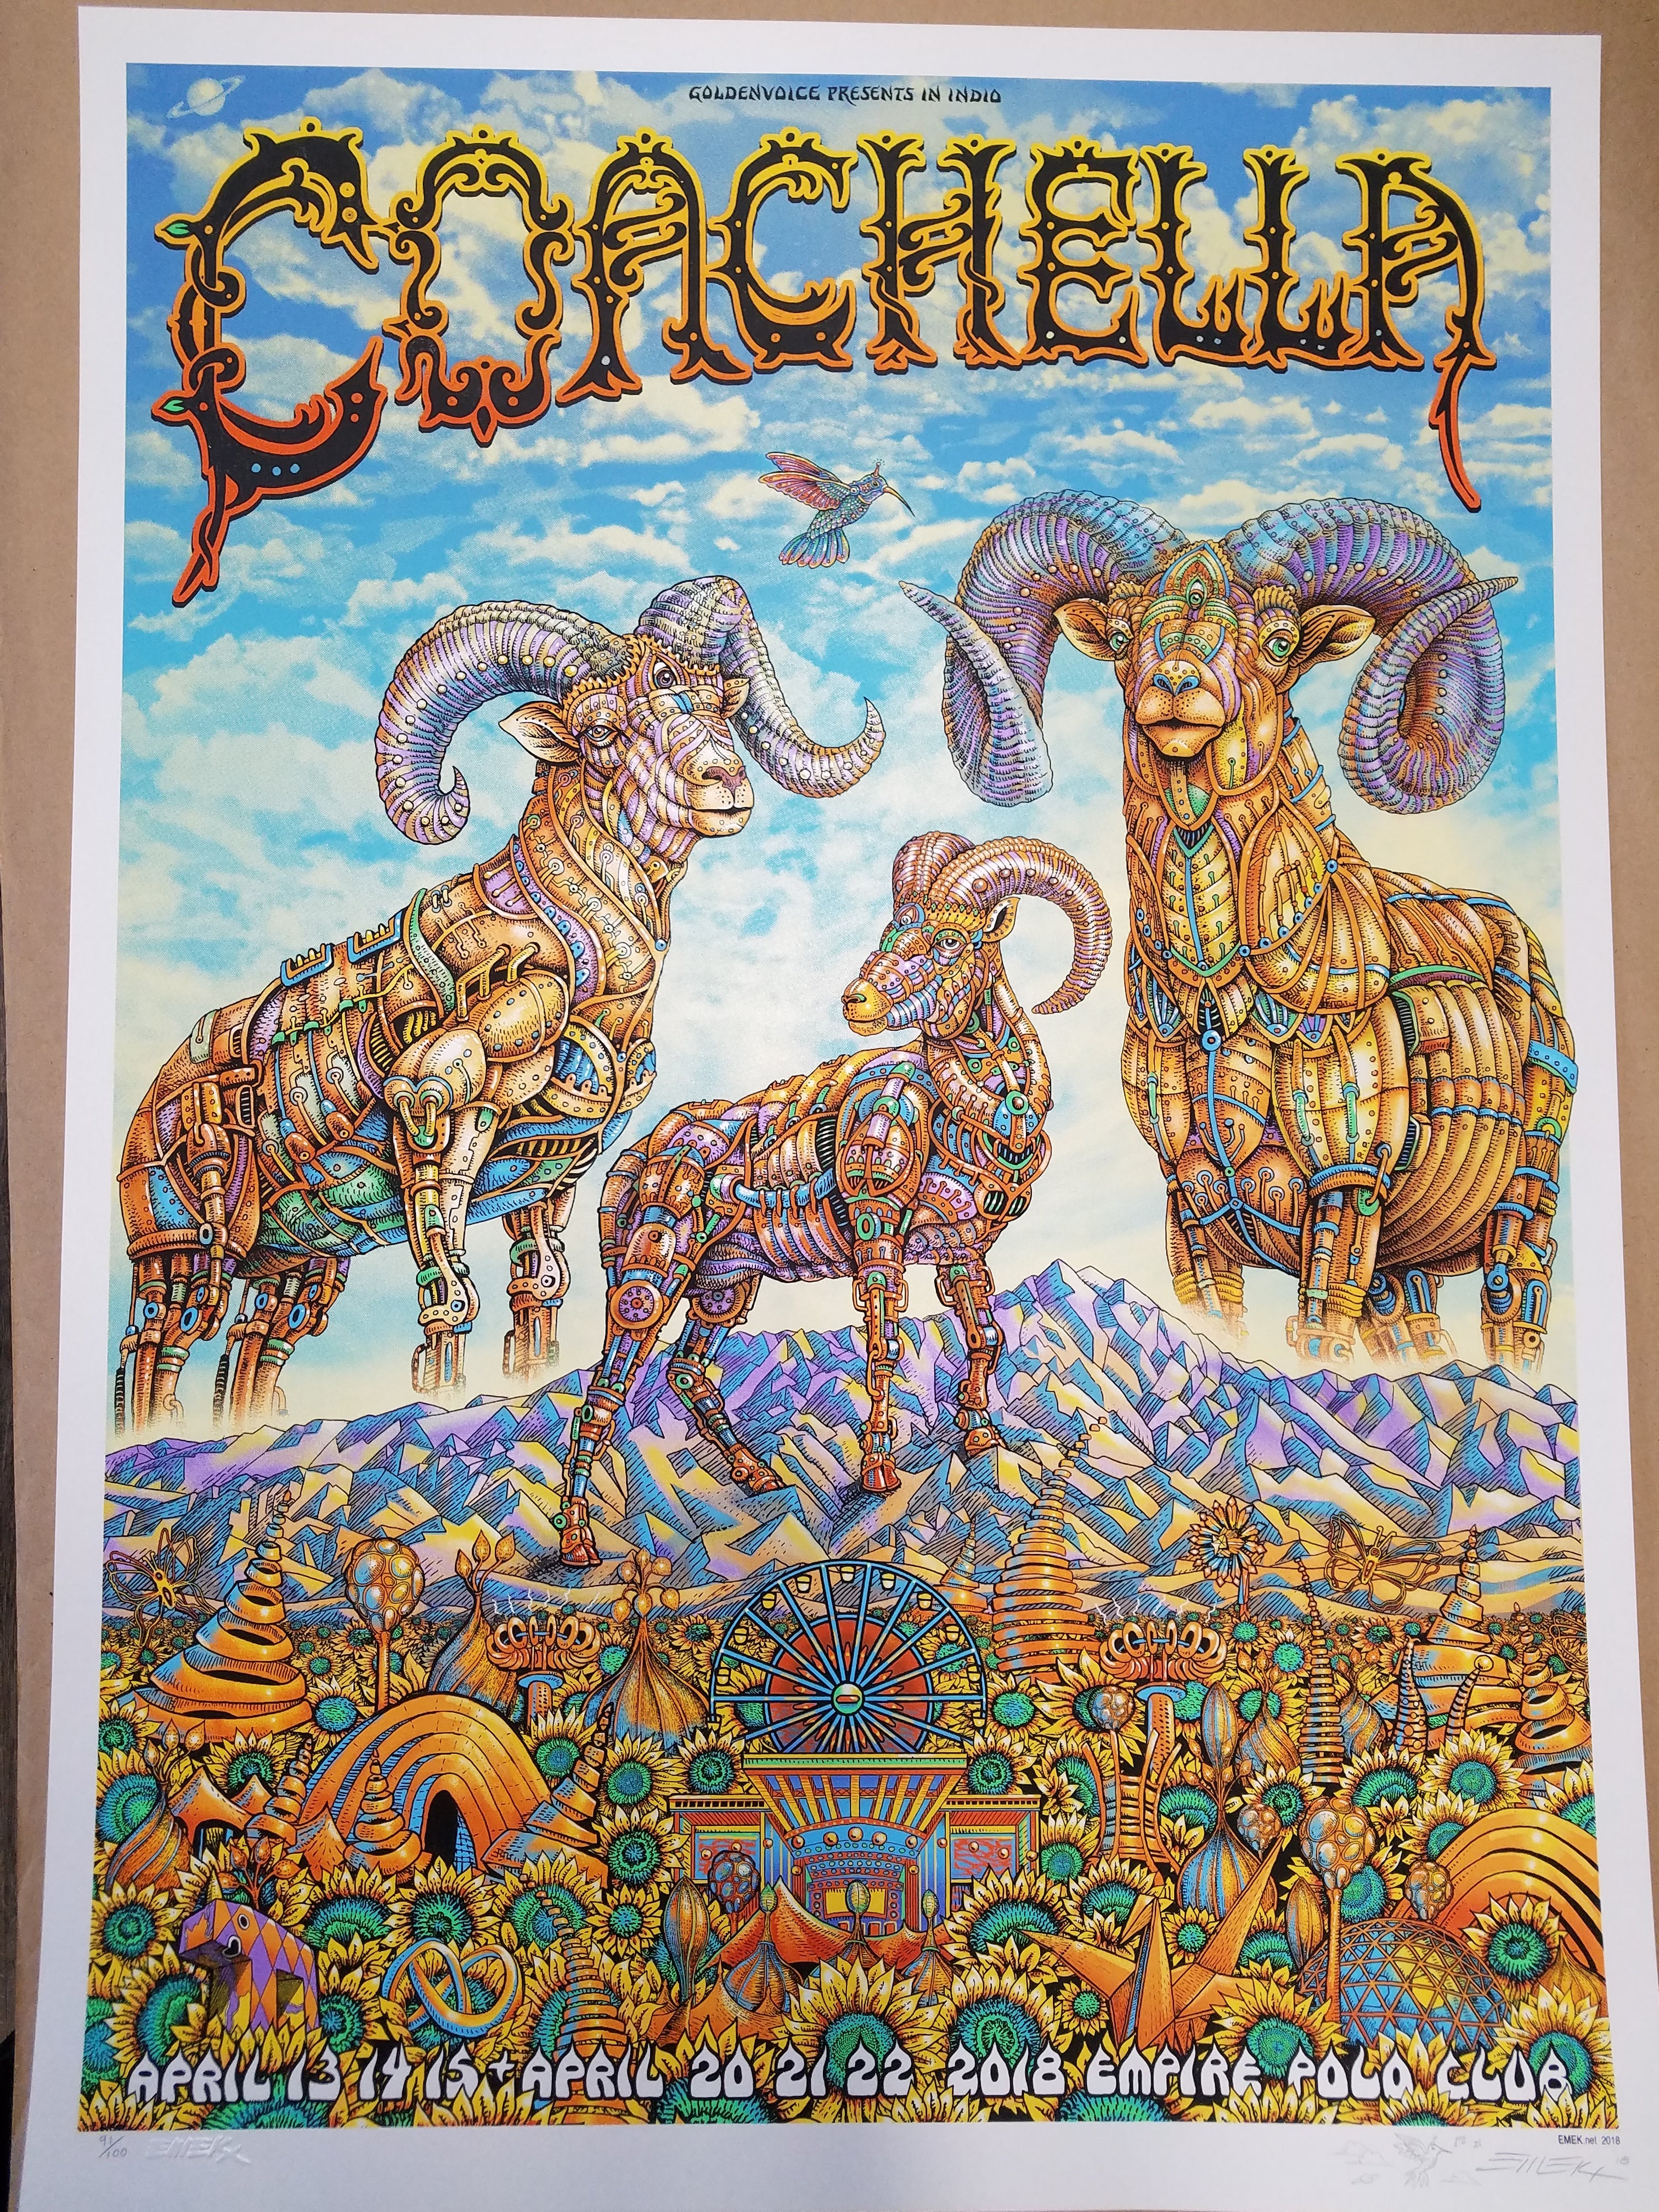 Coachella 2018 by Emek.  Screen print.  22" x 30.5".  All prints are stored flat. Print is in very good condition as received from the artist.  Following purchase, all prints are rolled in archival paper and shipped in a sturdy cardboard tube which is bubble wrapped on the inside for each end.